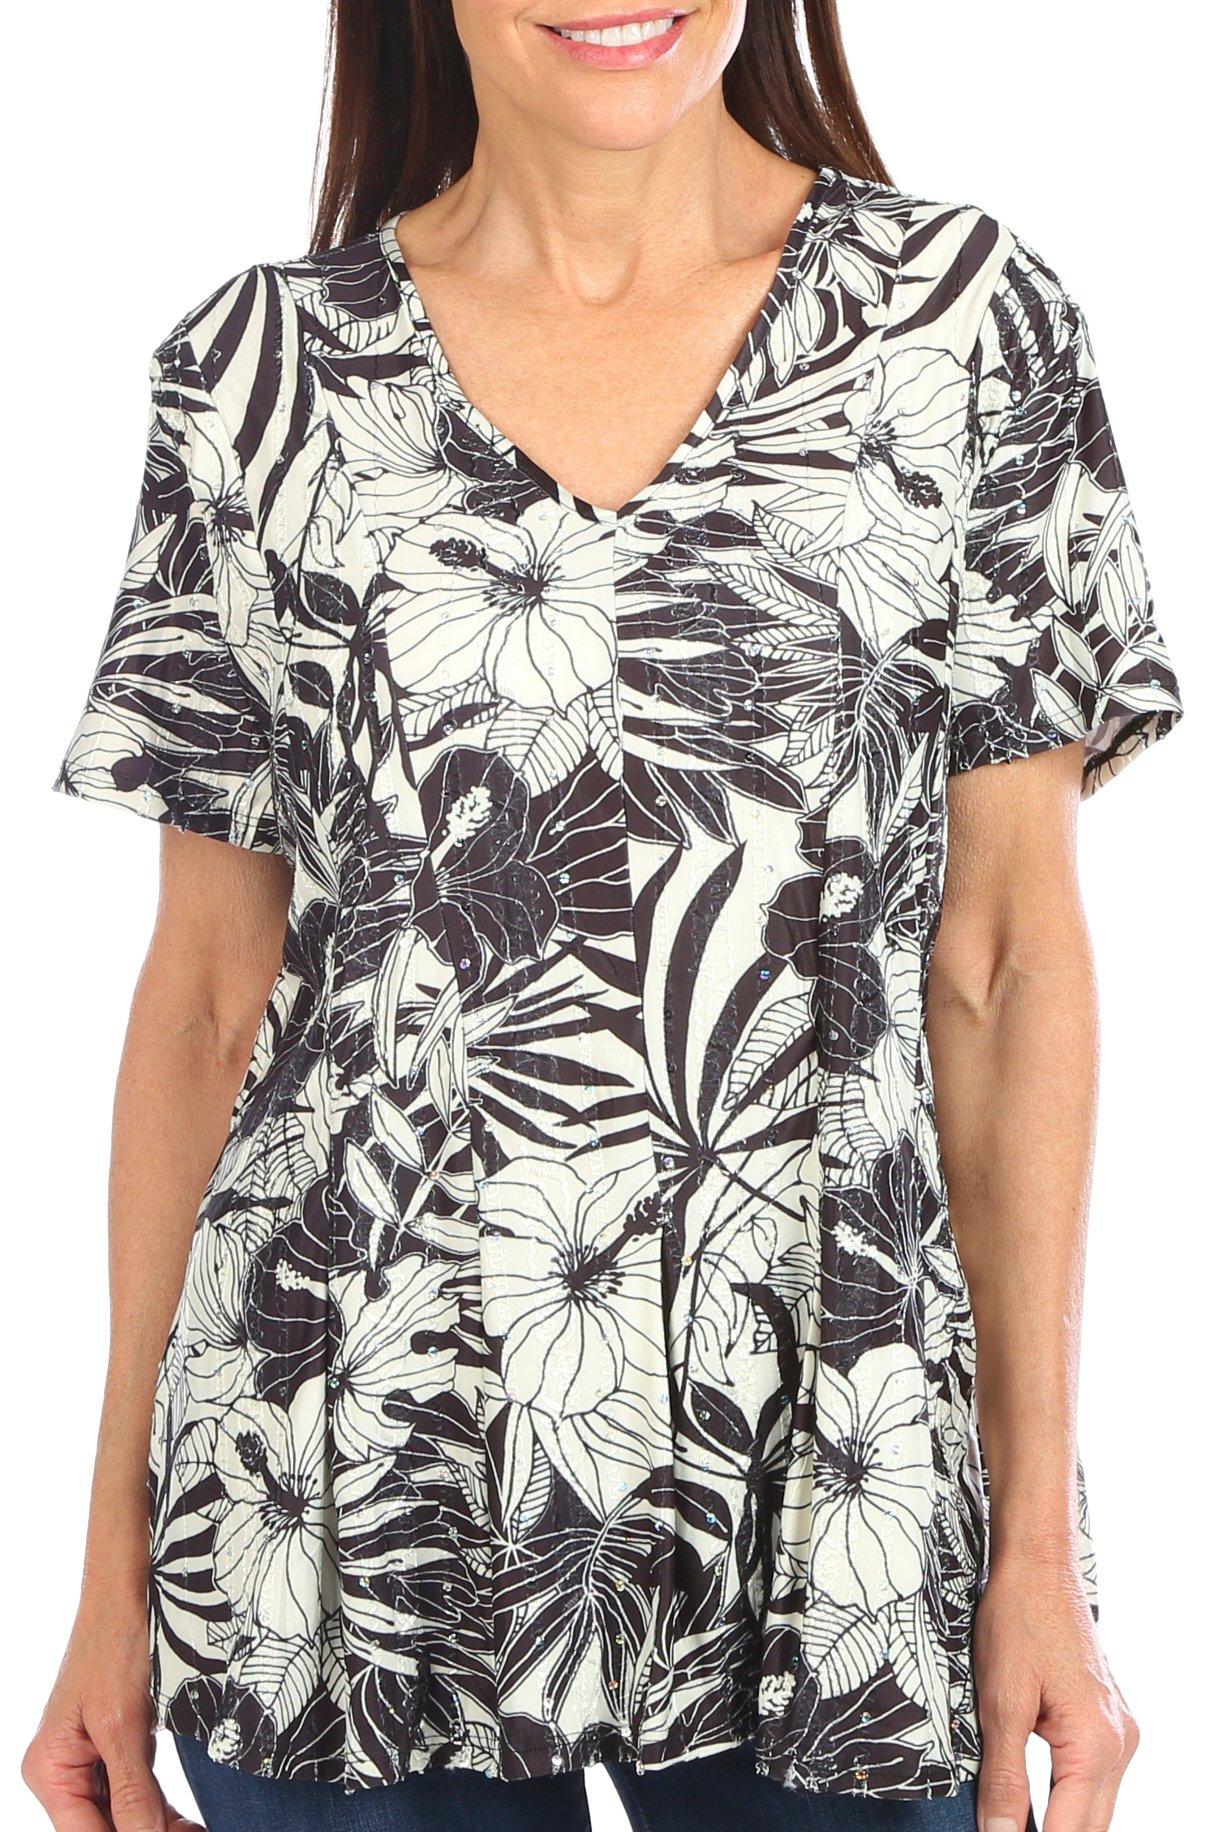 Coral Bay Womens Print Short Sleeve Pleated Top